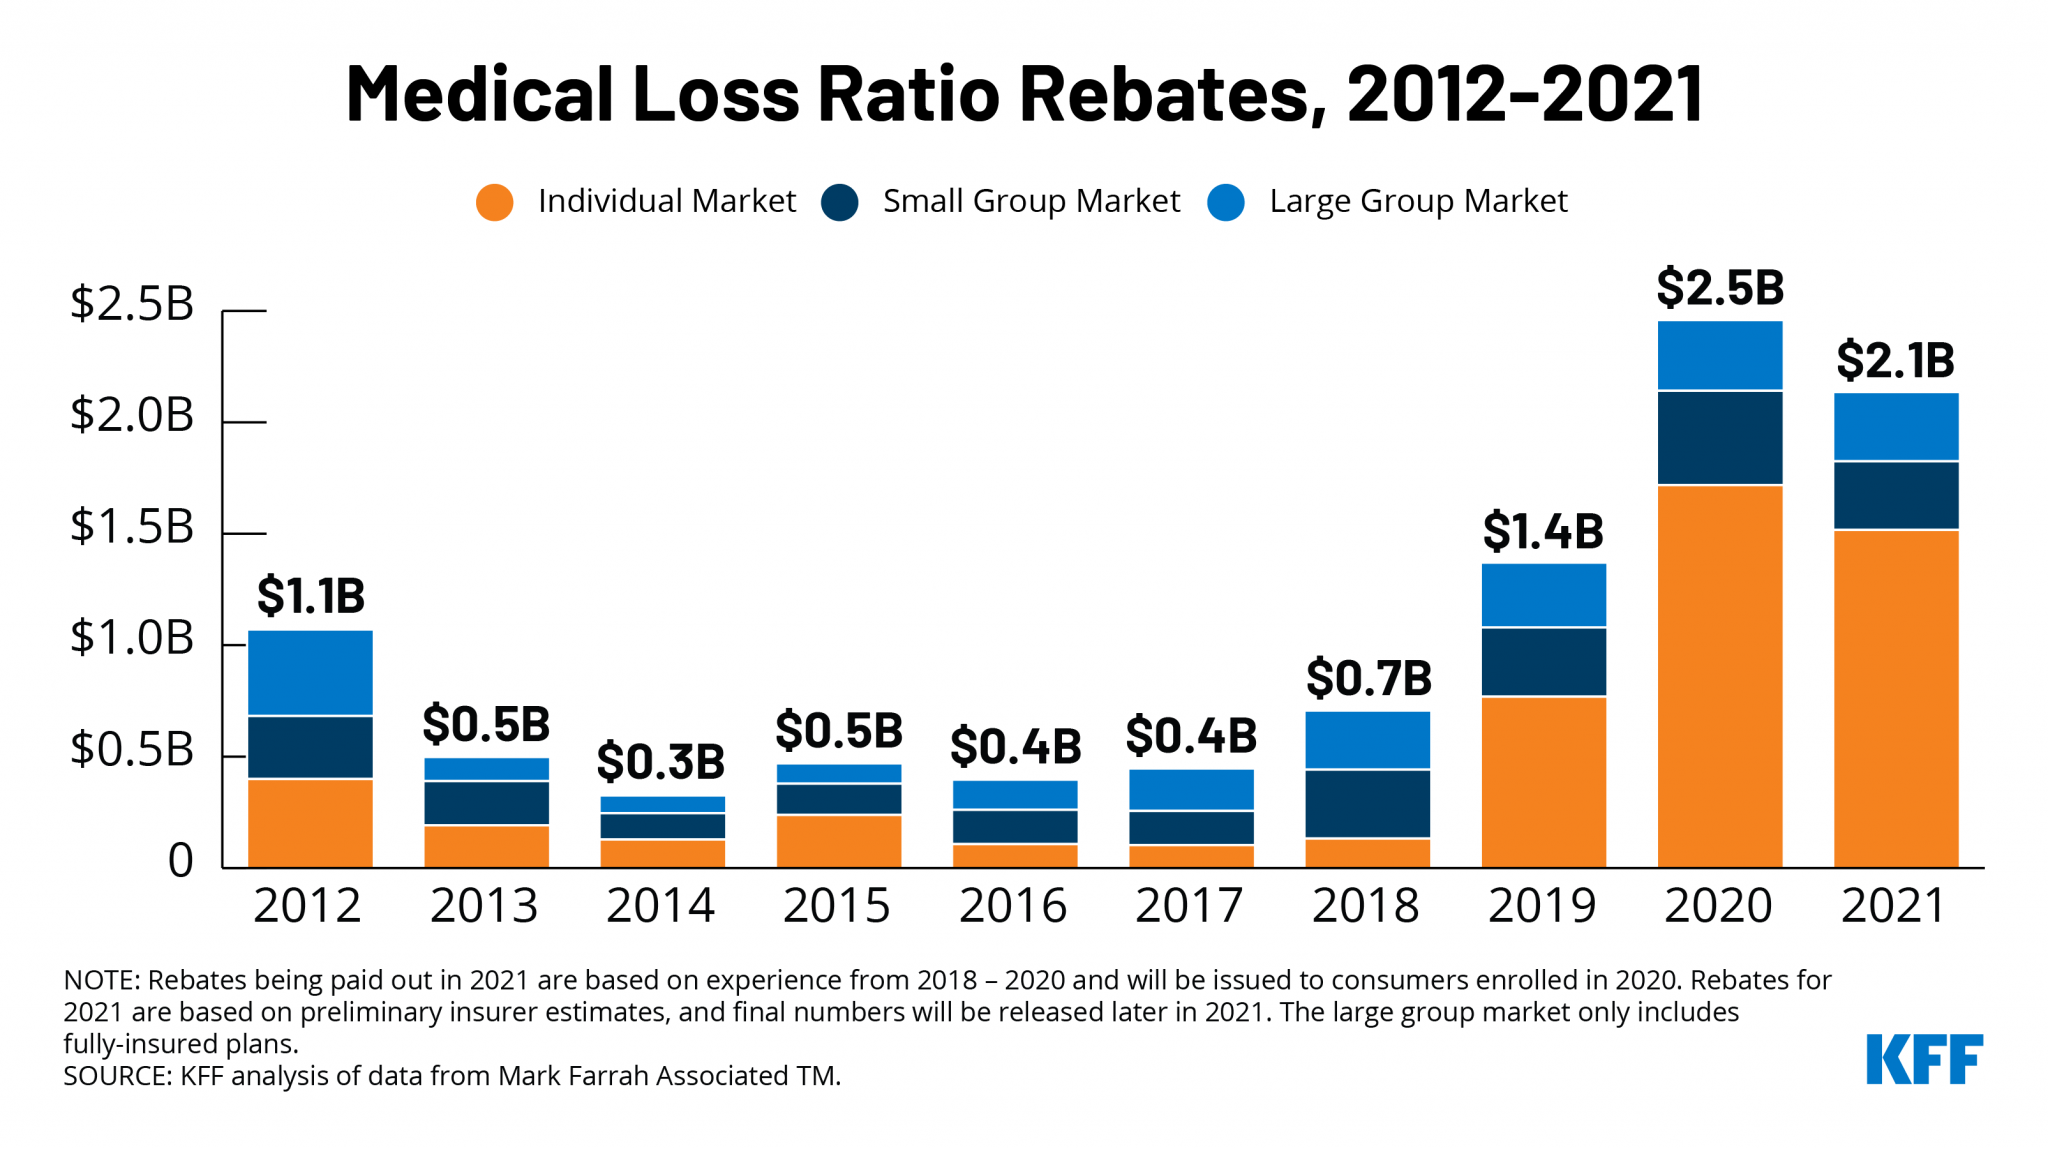 beyond-rebates-how-much-are-consumers-saving-from-the-aca-s-medical